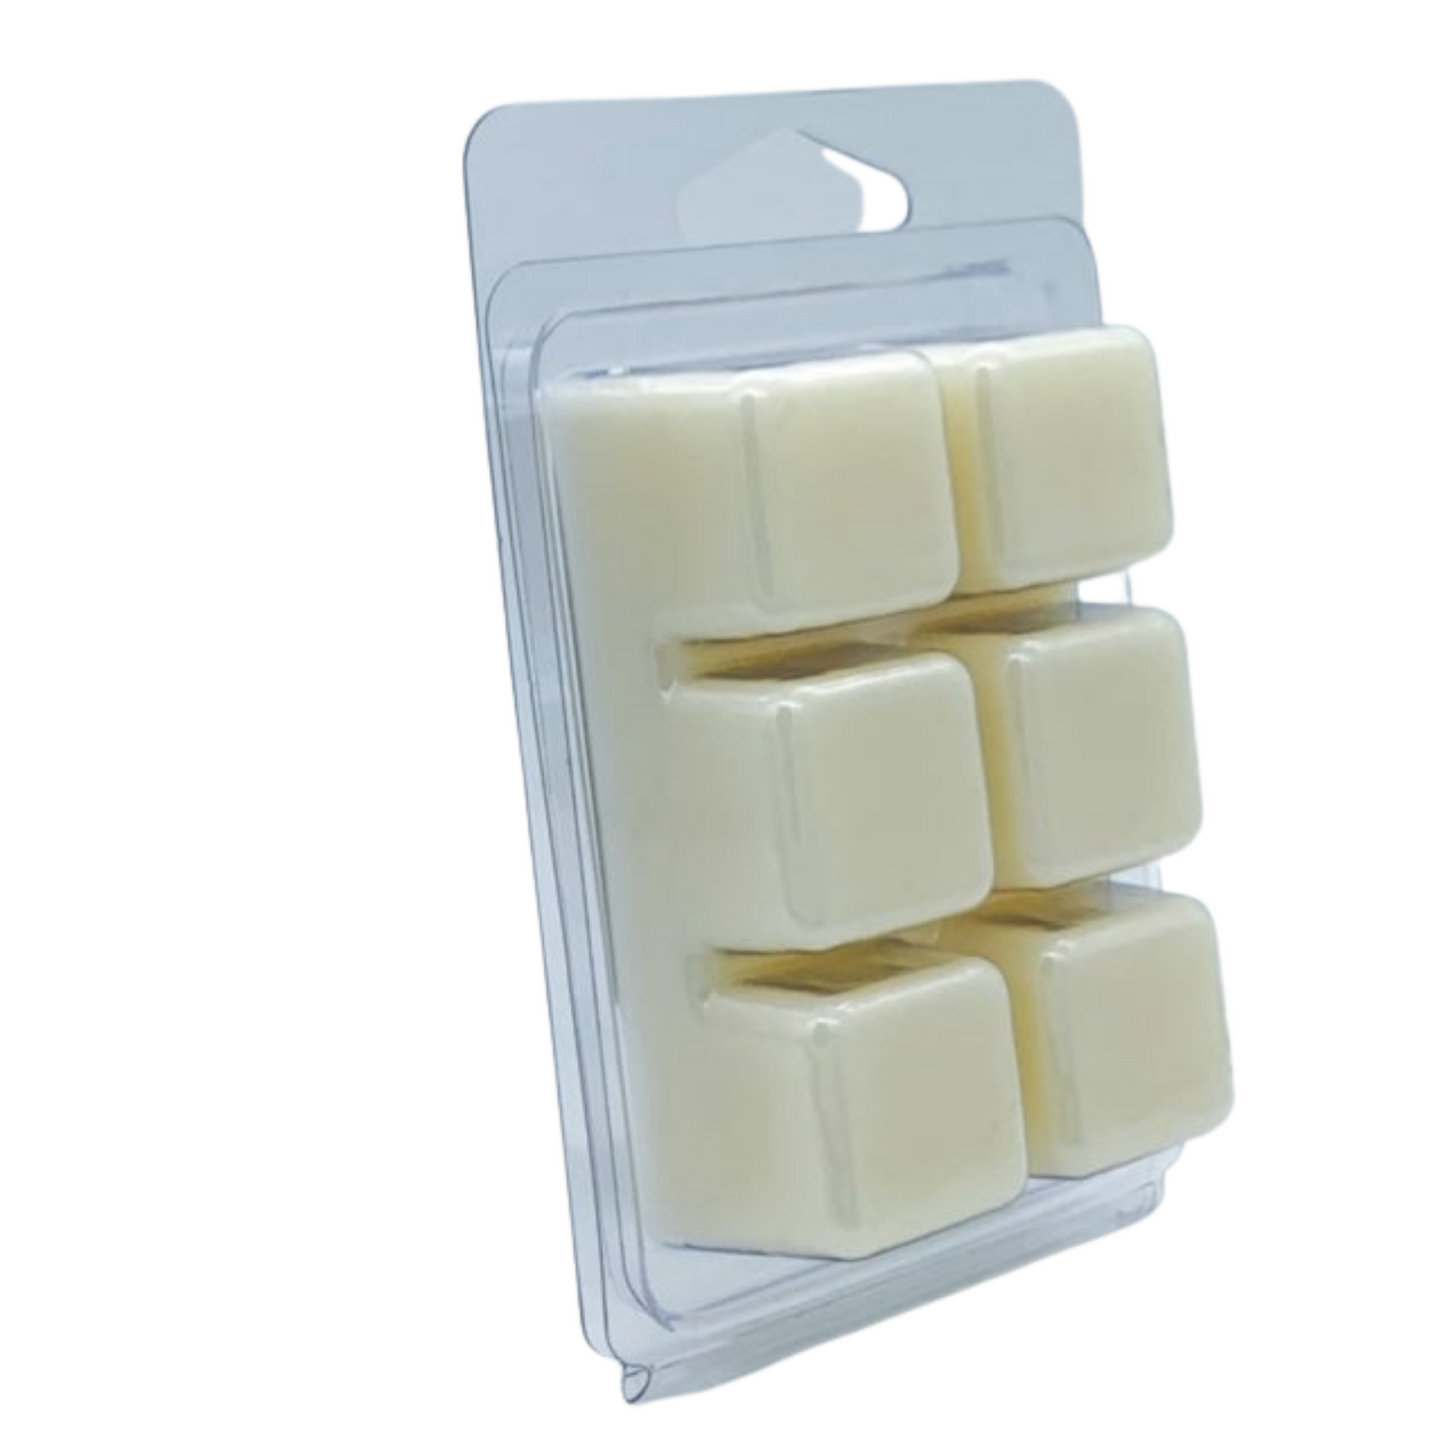 LEMON BLOSSOM | Scented Soy Wax Melts